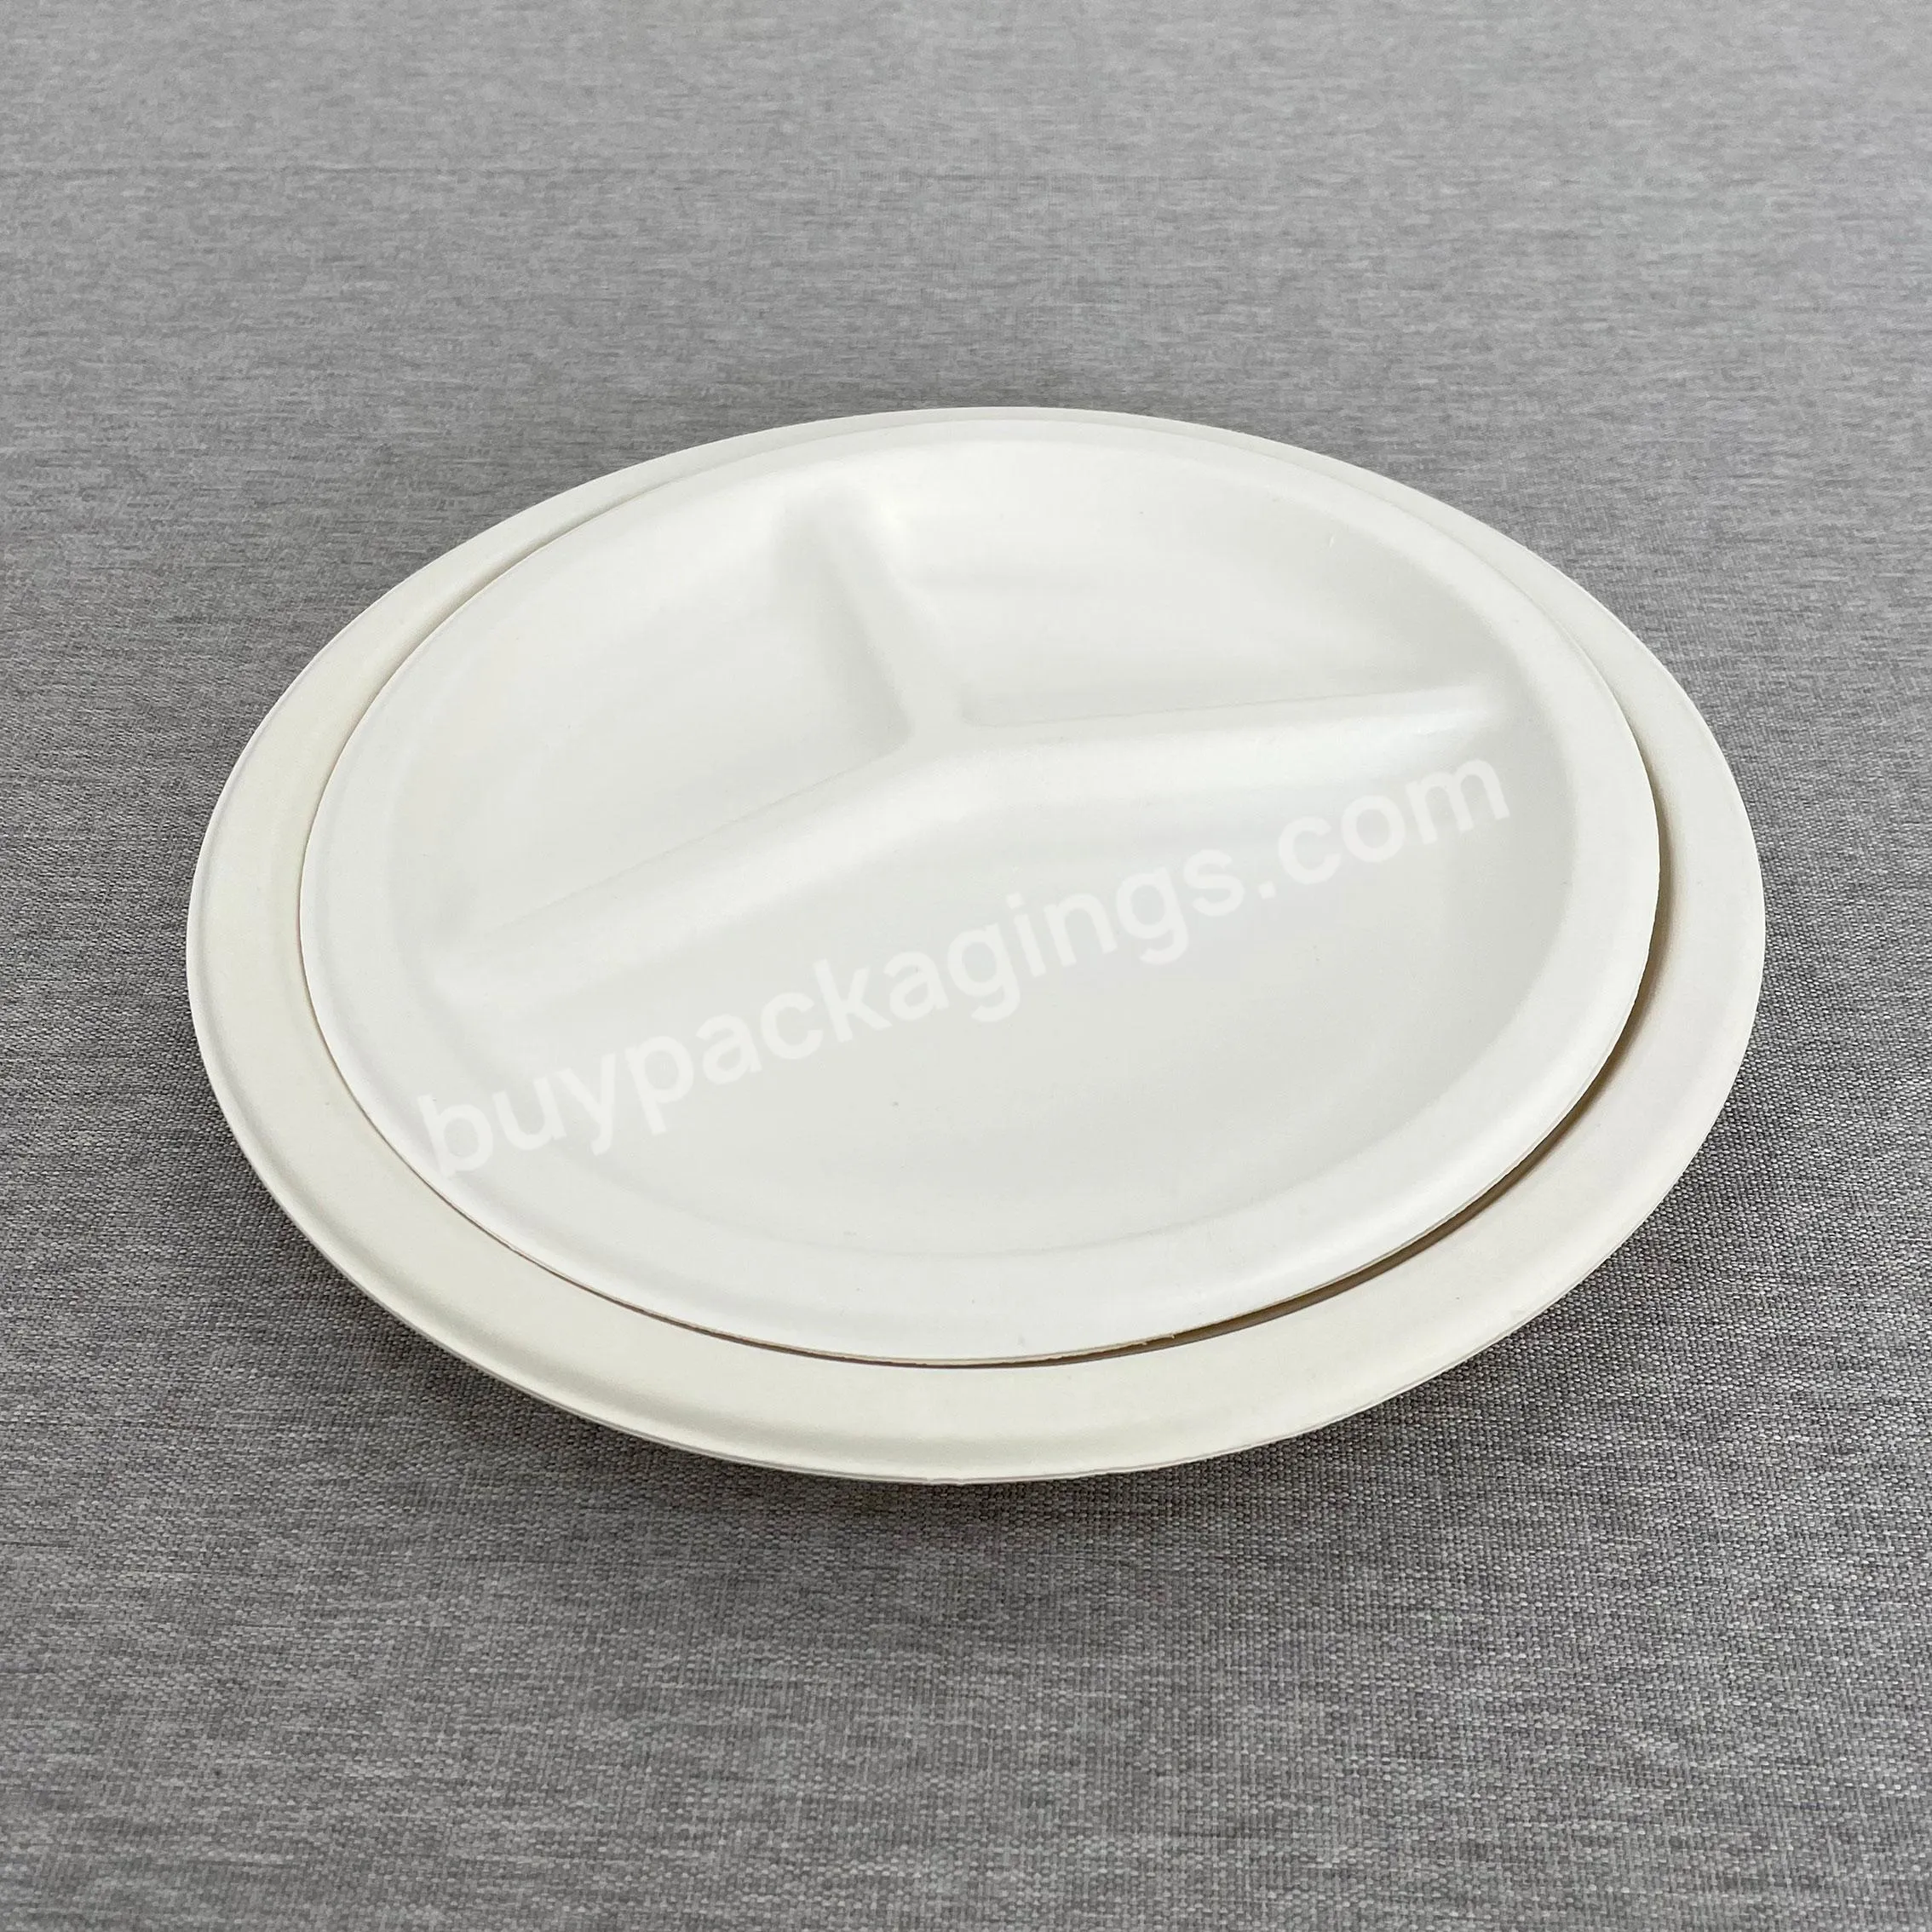 100% Compostable Round Disposable White 9 10 Inch Craft Heavy Duty Birthday Paper Parties Plate 125 Pack - Buy 100% Compostable Paper Plates 10 Inch 125 Pack,White Paper 10" Plates,Round Disposable Heavy Duty Paper Plates 10 In.